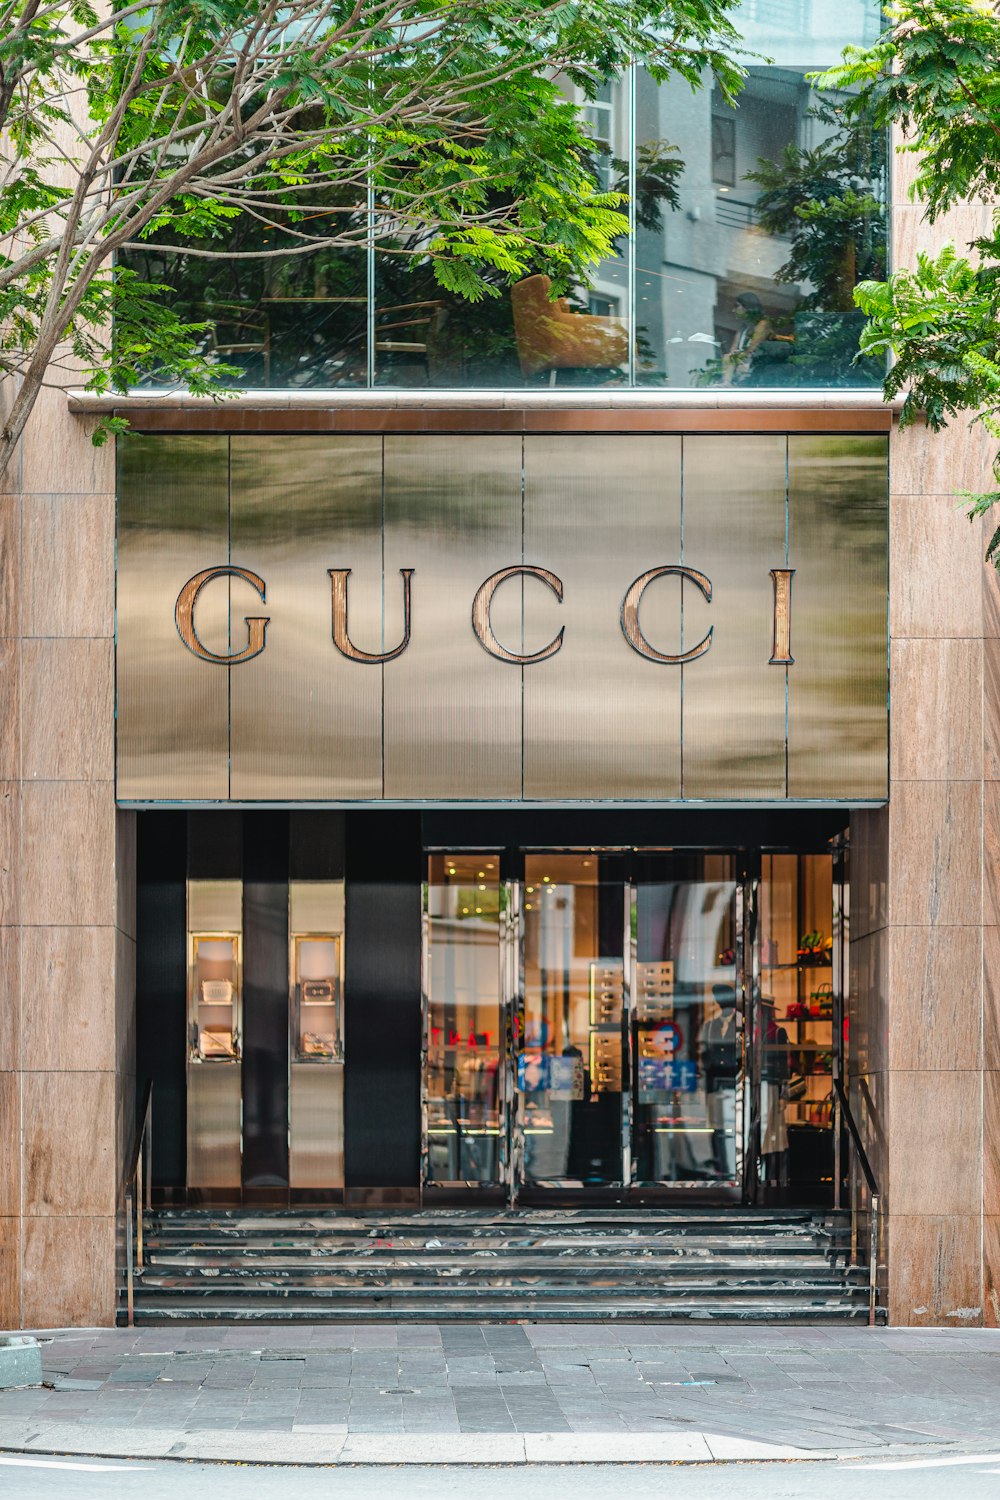 the entrance to a gucci store in a city